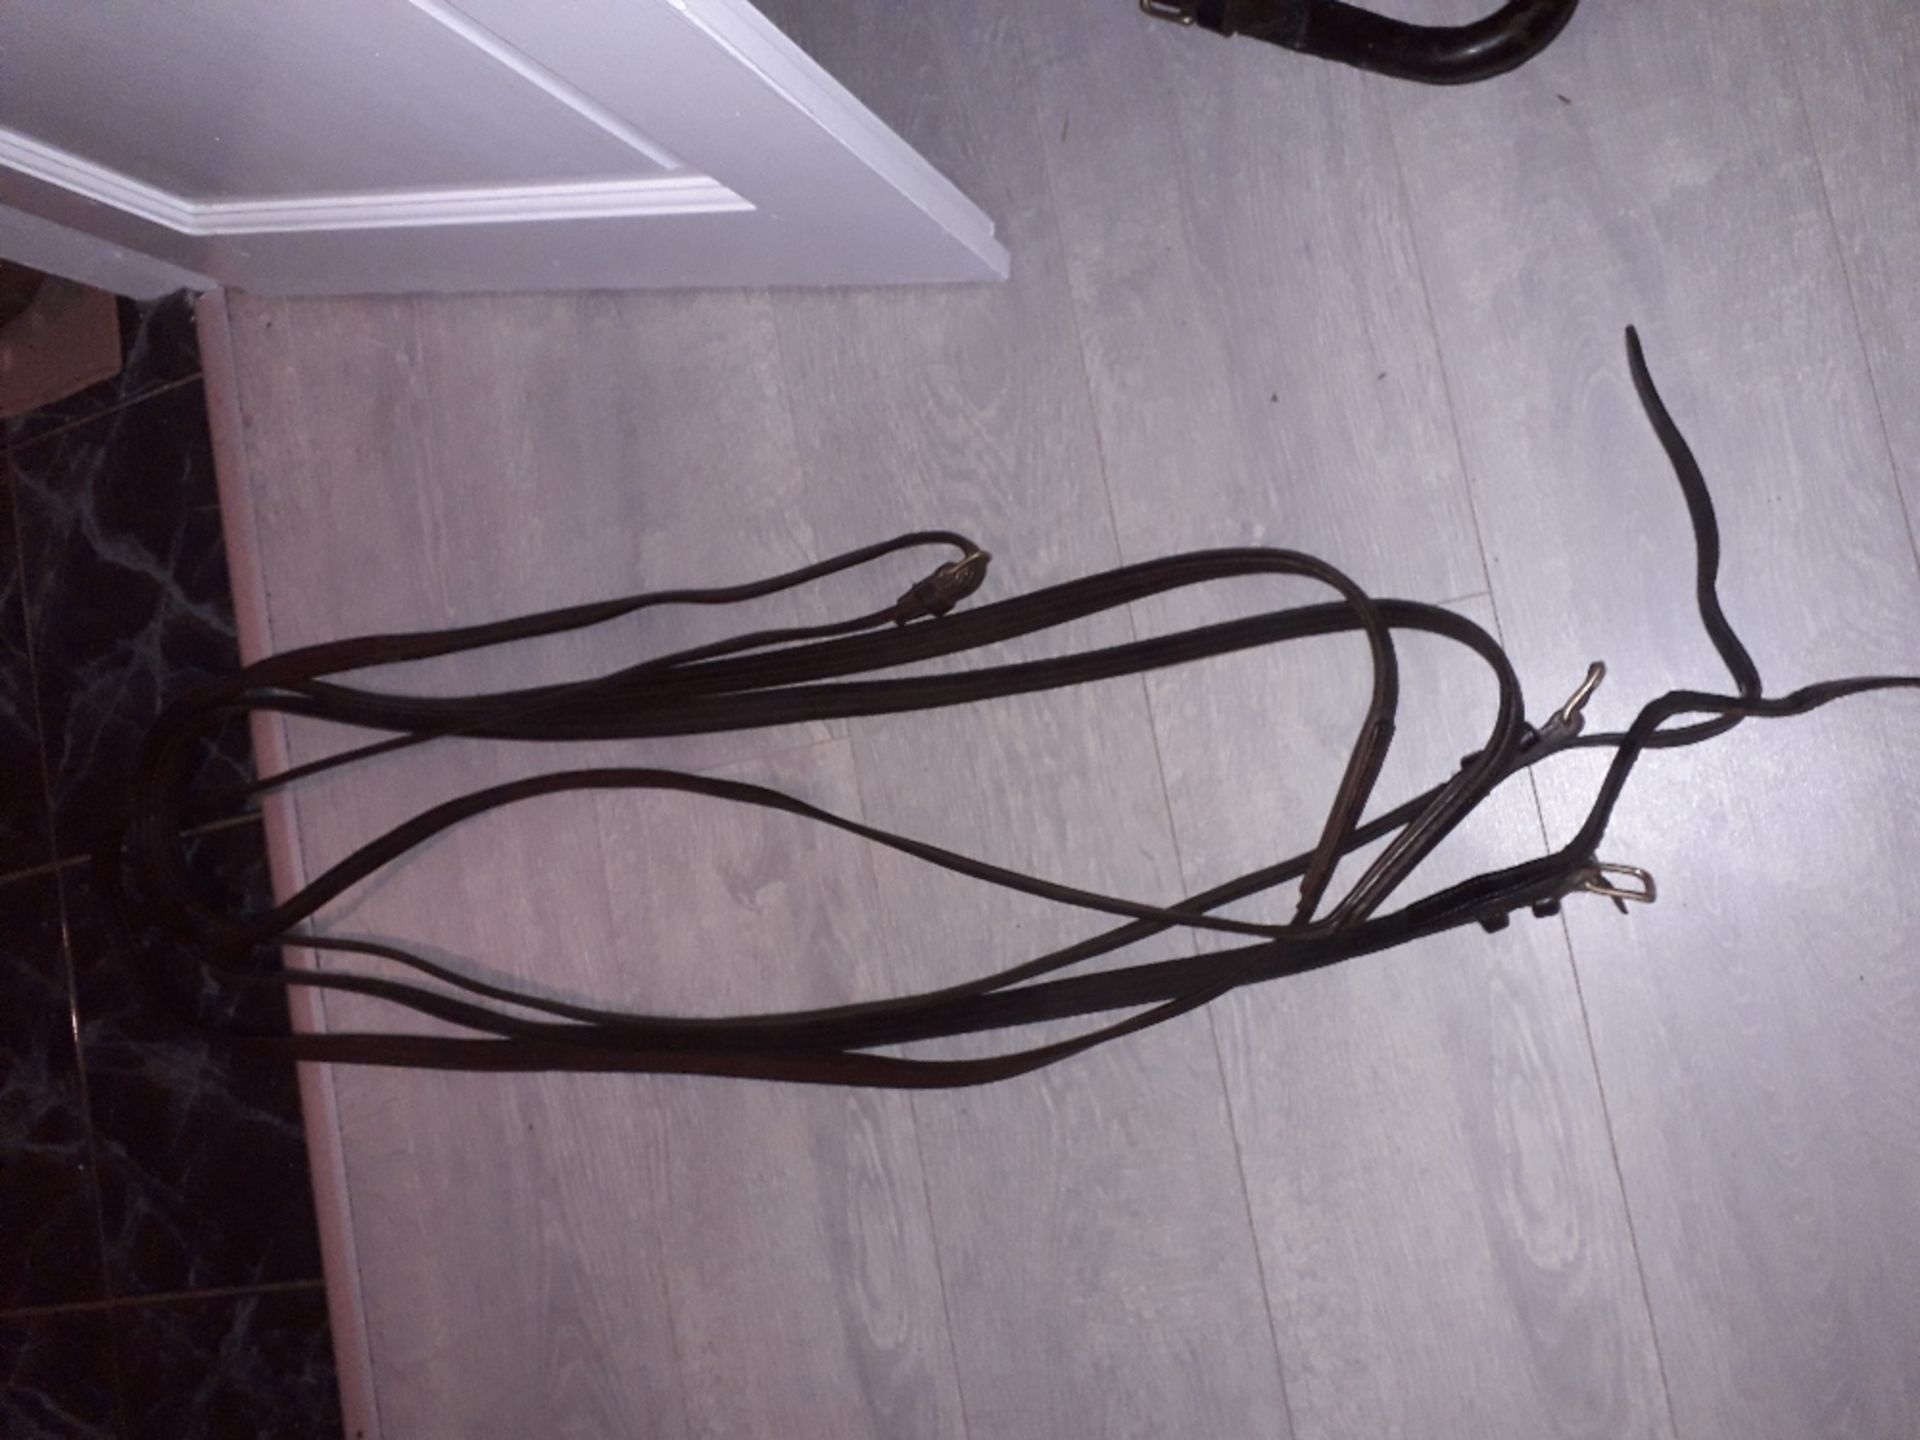 Set of English reins, 30ft; in good condition